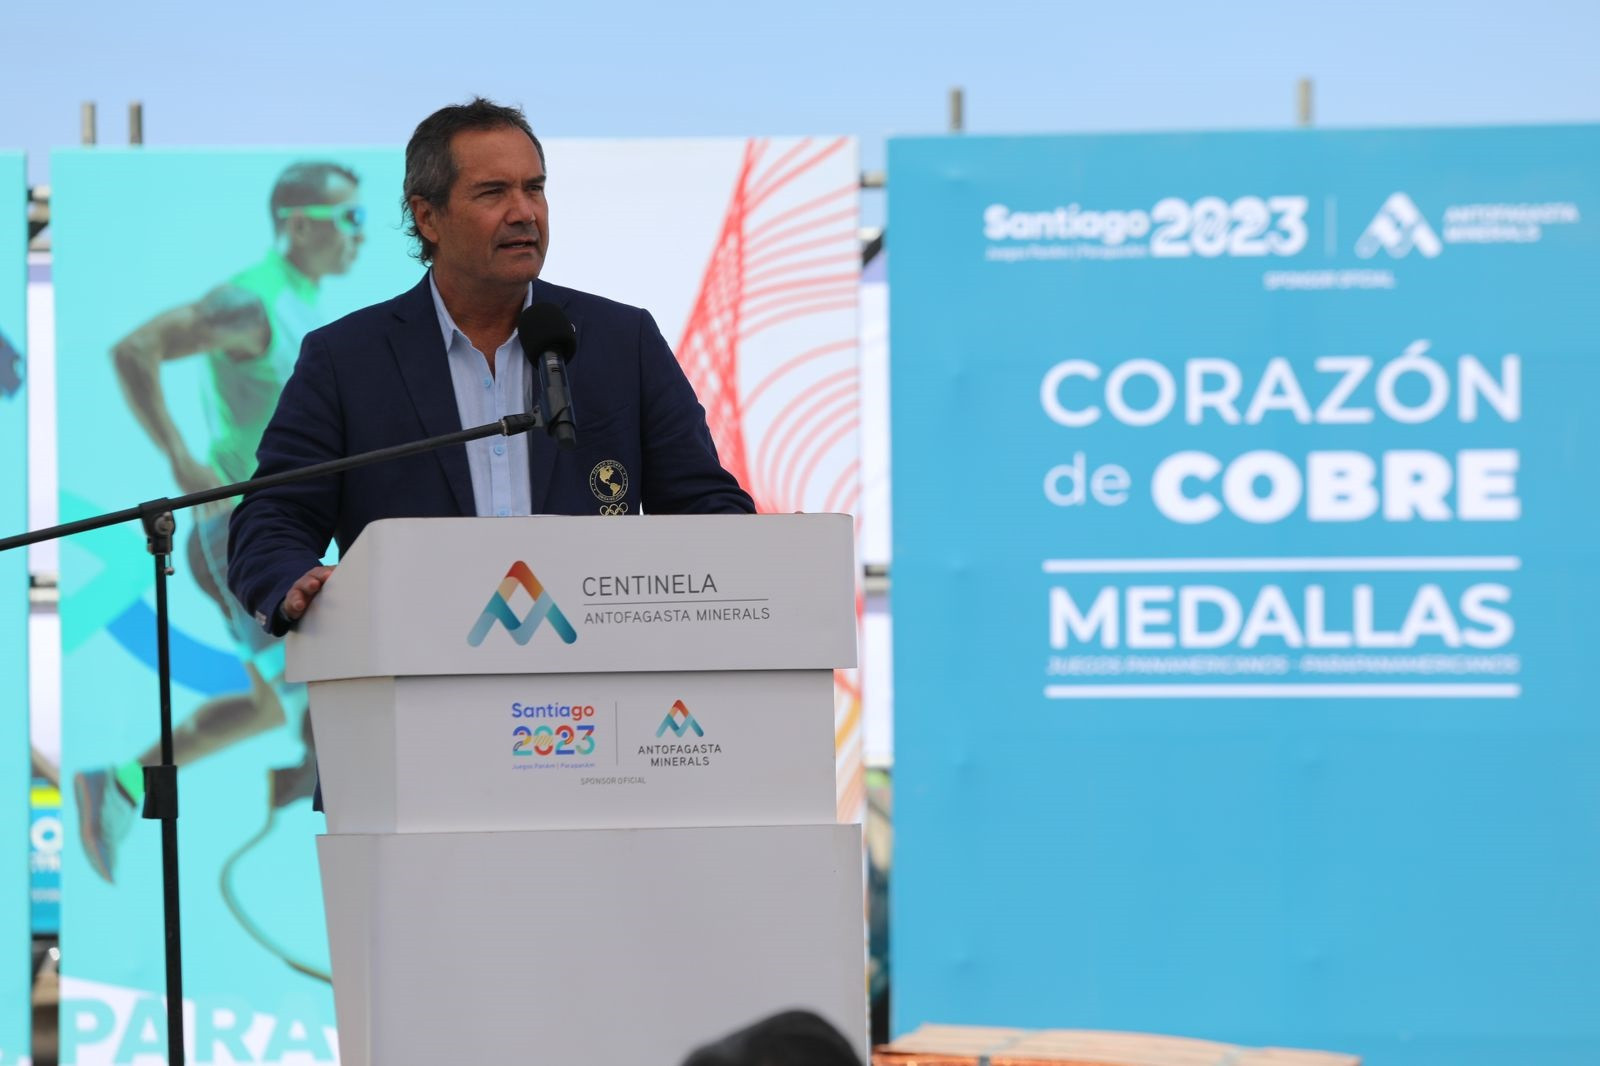 Panam Sports President Neven Ilic described the copper-centred medals as 